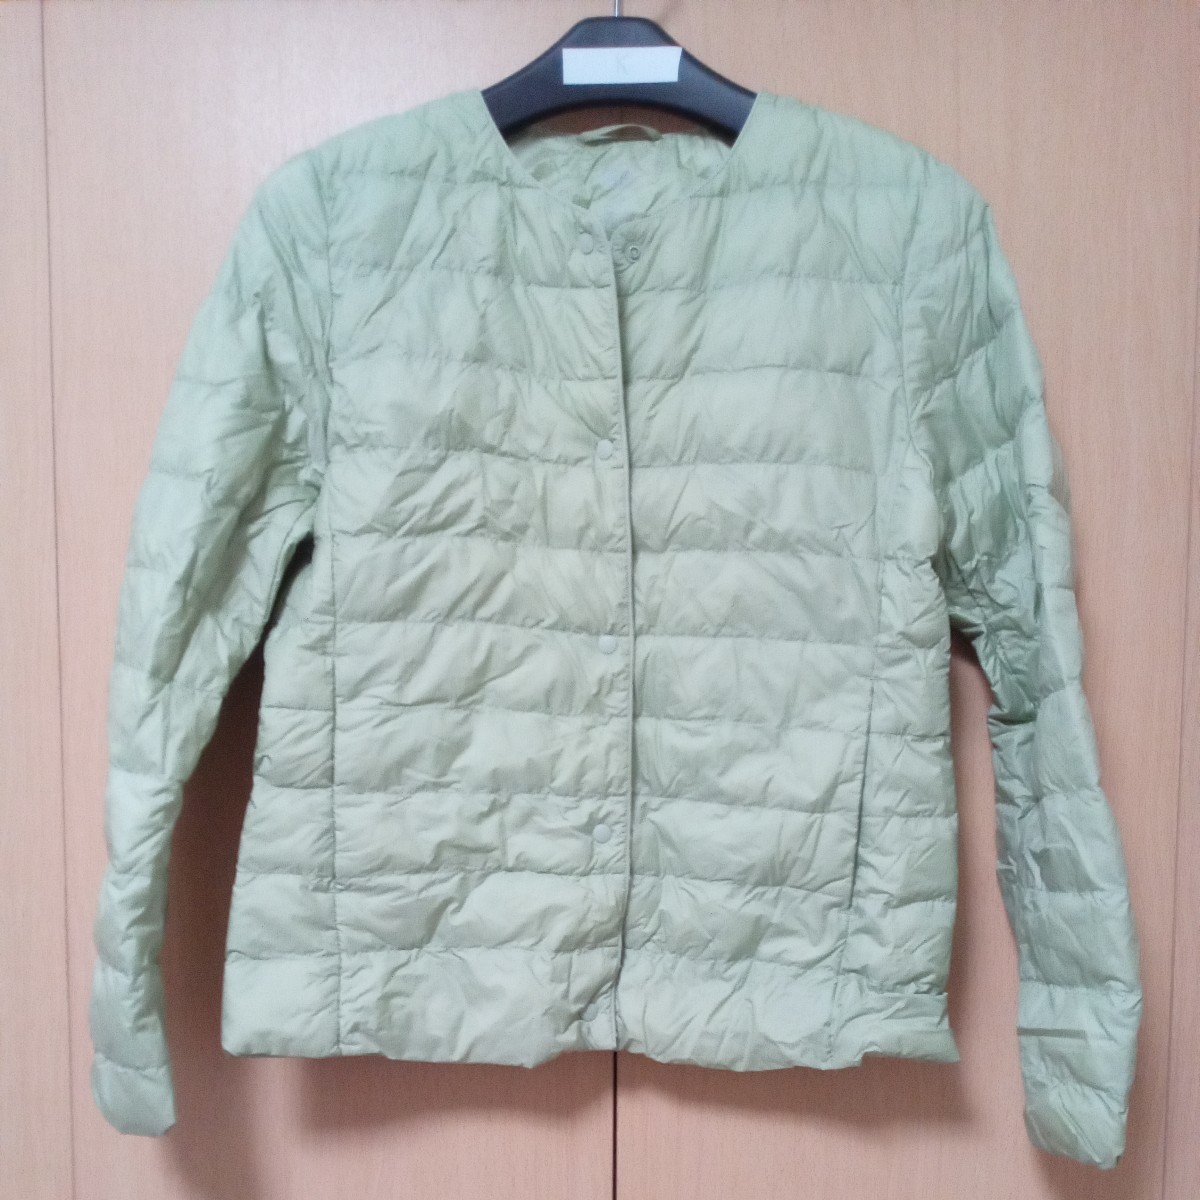  Uniqlo Ultra light down no color jacket lady's M pepper mint green 